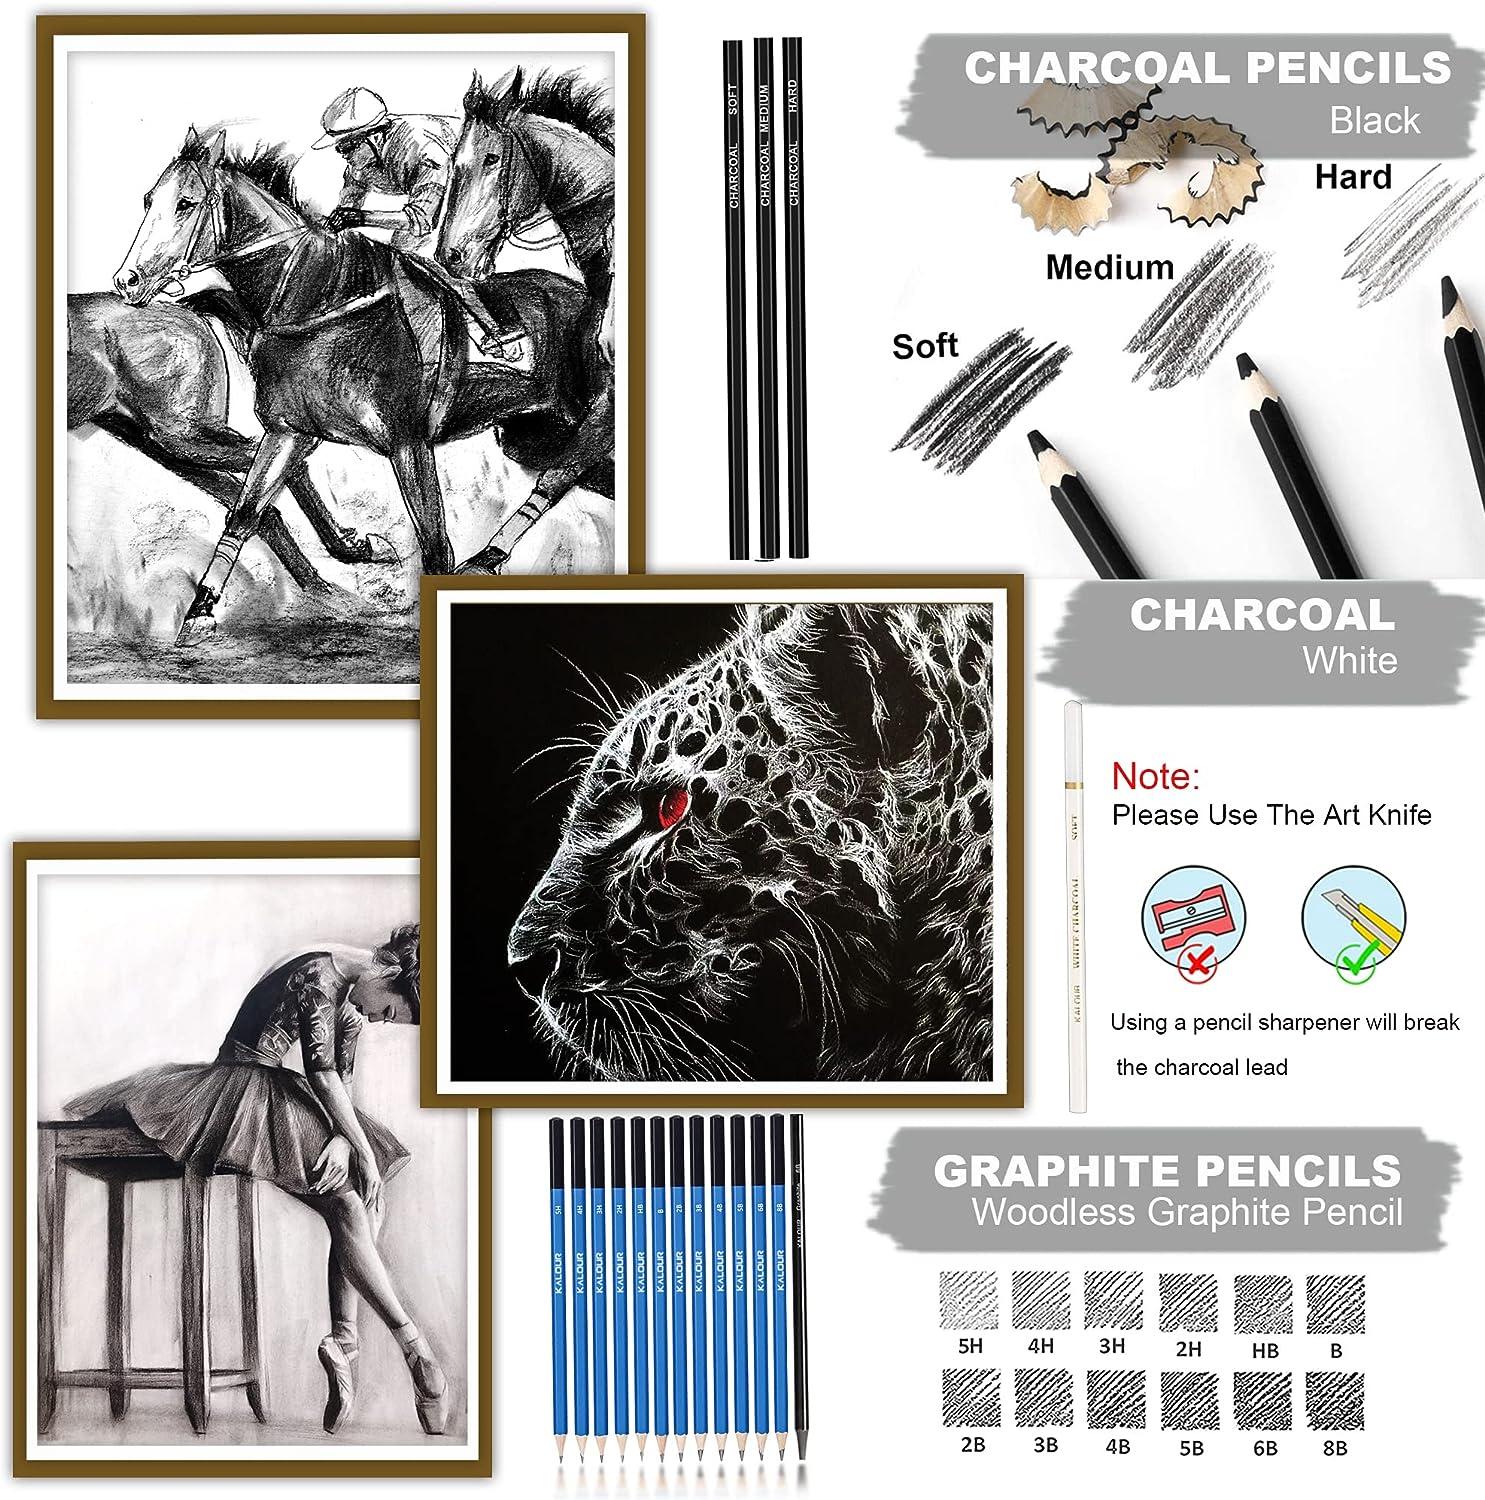 KALOUR 54-Pack Sketch Drawing Pencils Kit with Sketchbook,Include Graphite,Charcoal Pencils and Artists Tools,Pro Art Drawing Supplies for Adults